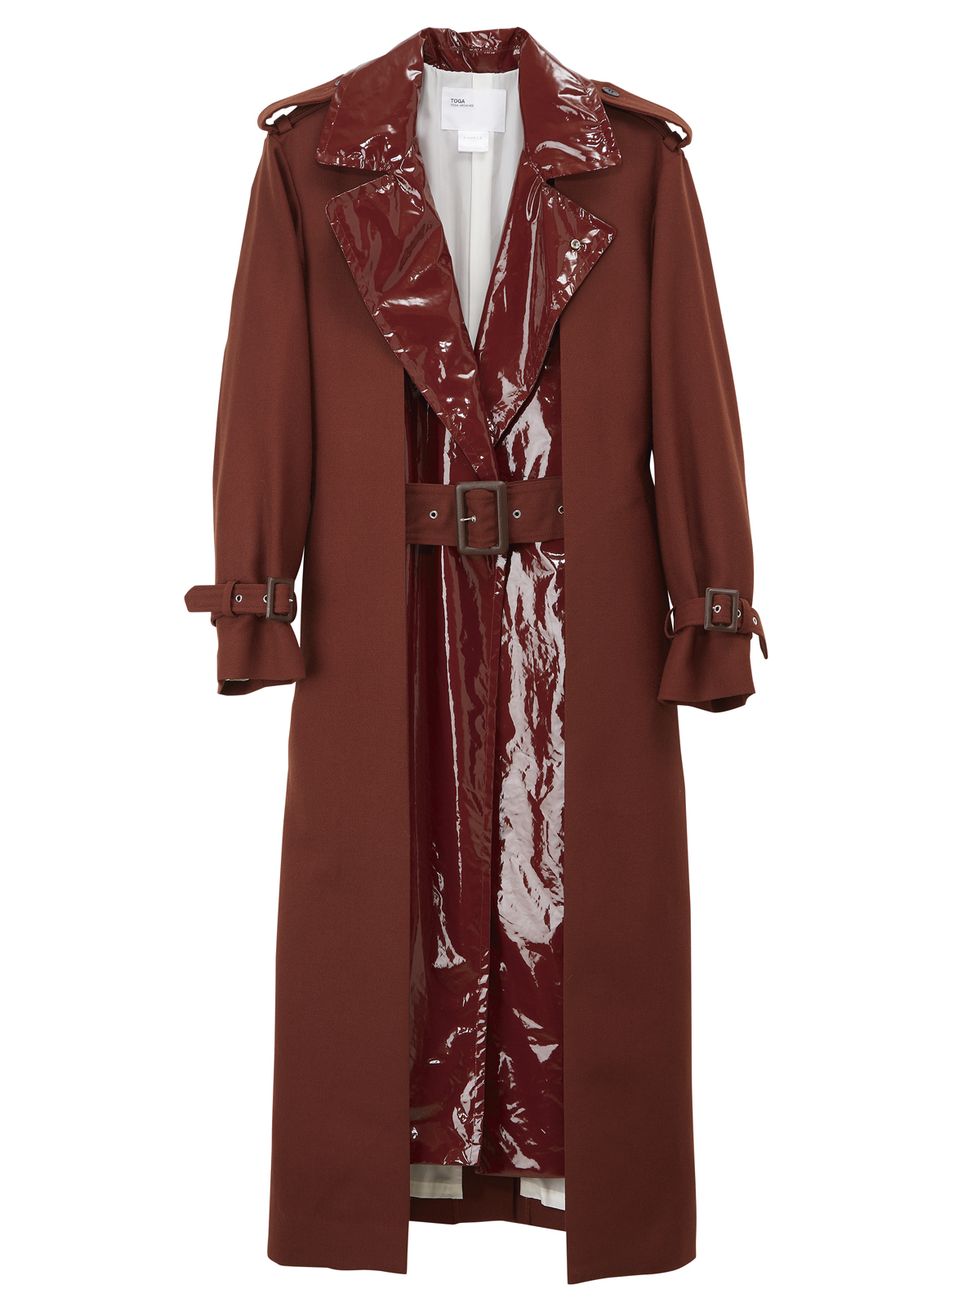 Clothing, Outerwear, Coat, Overcoat, Brown, Robe, Trench coat, Sleeve, Maroon, Duster, 